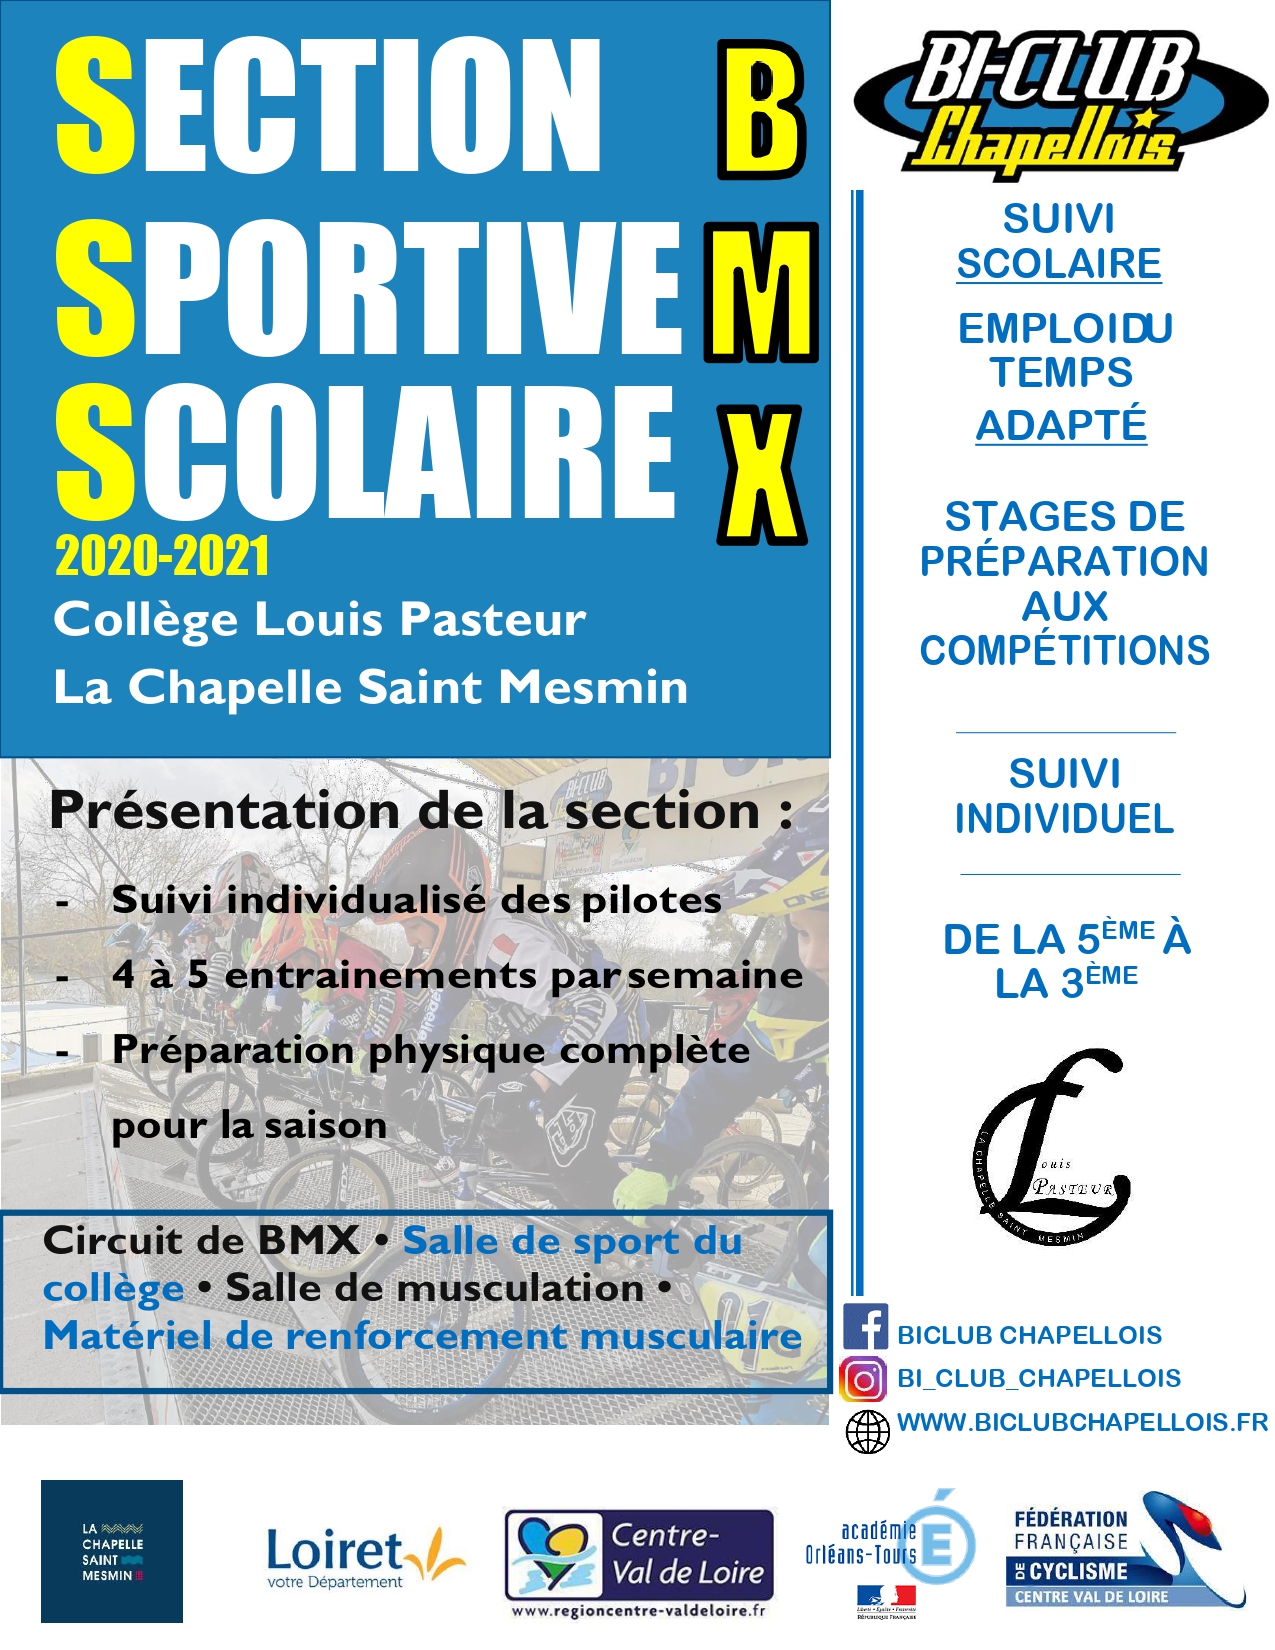 Flyer section sportive scolaire